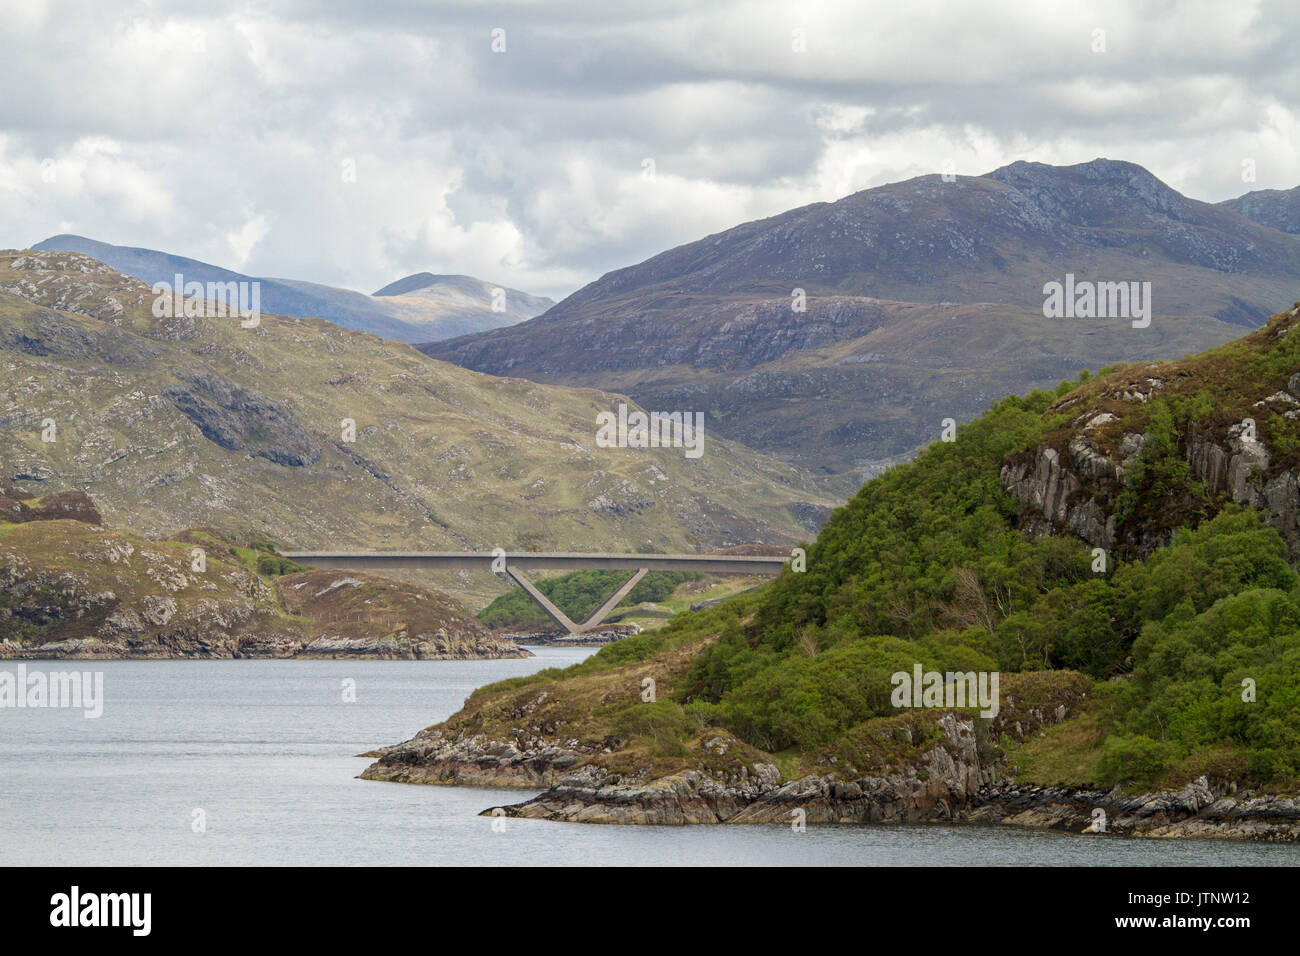 View of unique Kylescu bridge crossing a loch in a landscape dominated by rugged mountains in the highlands of Scotland Stock Photo